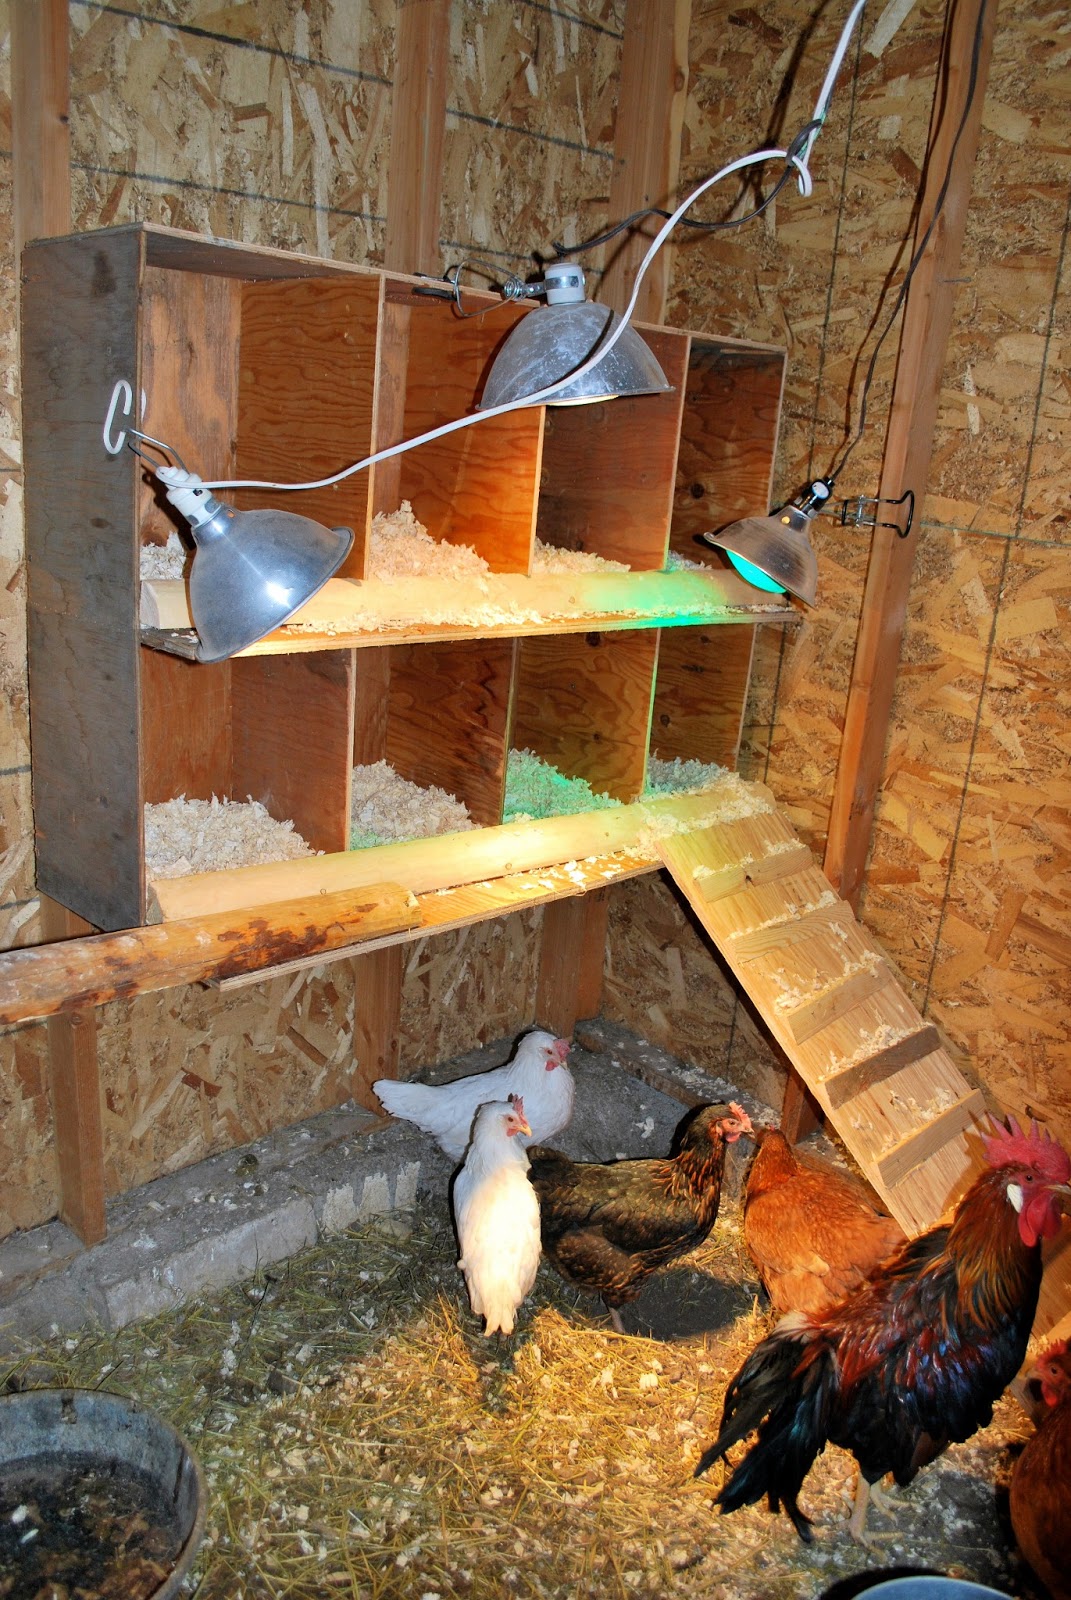 Chicken Nesting Boxes